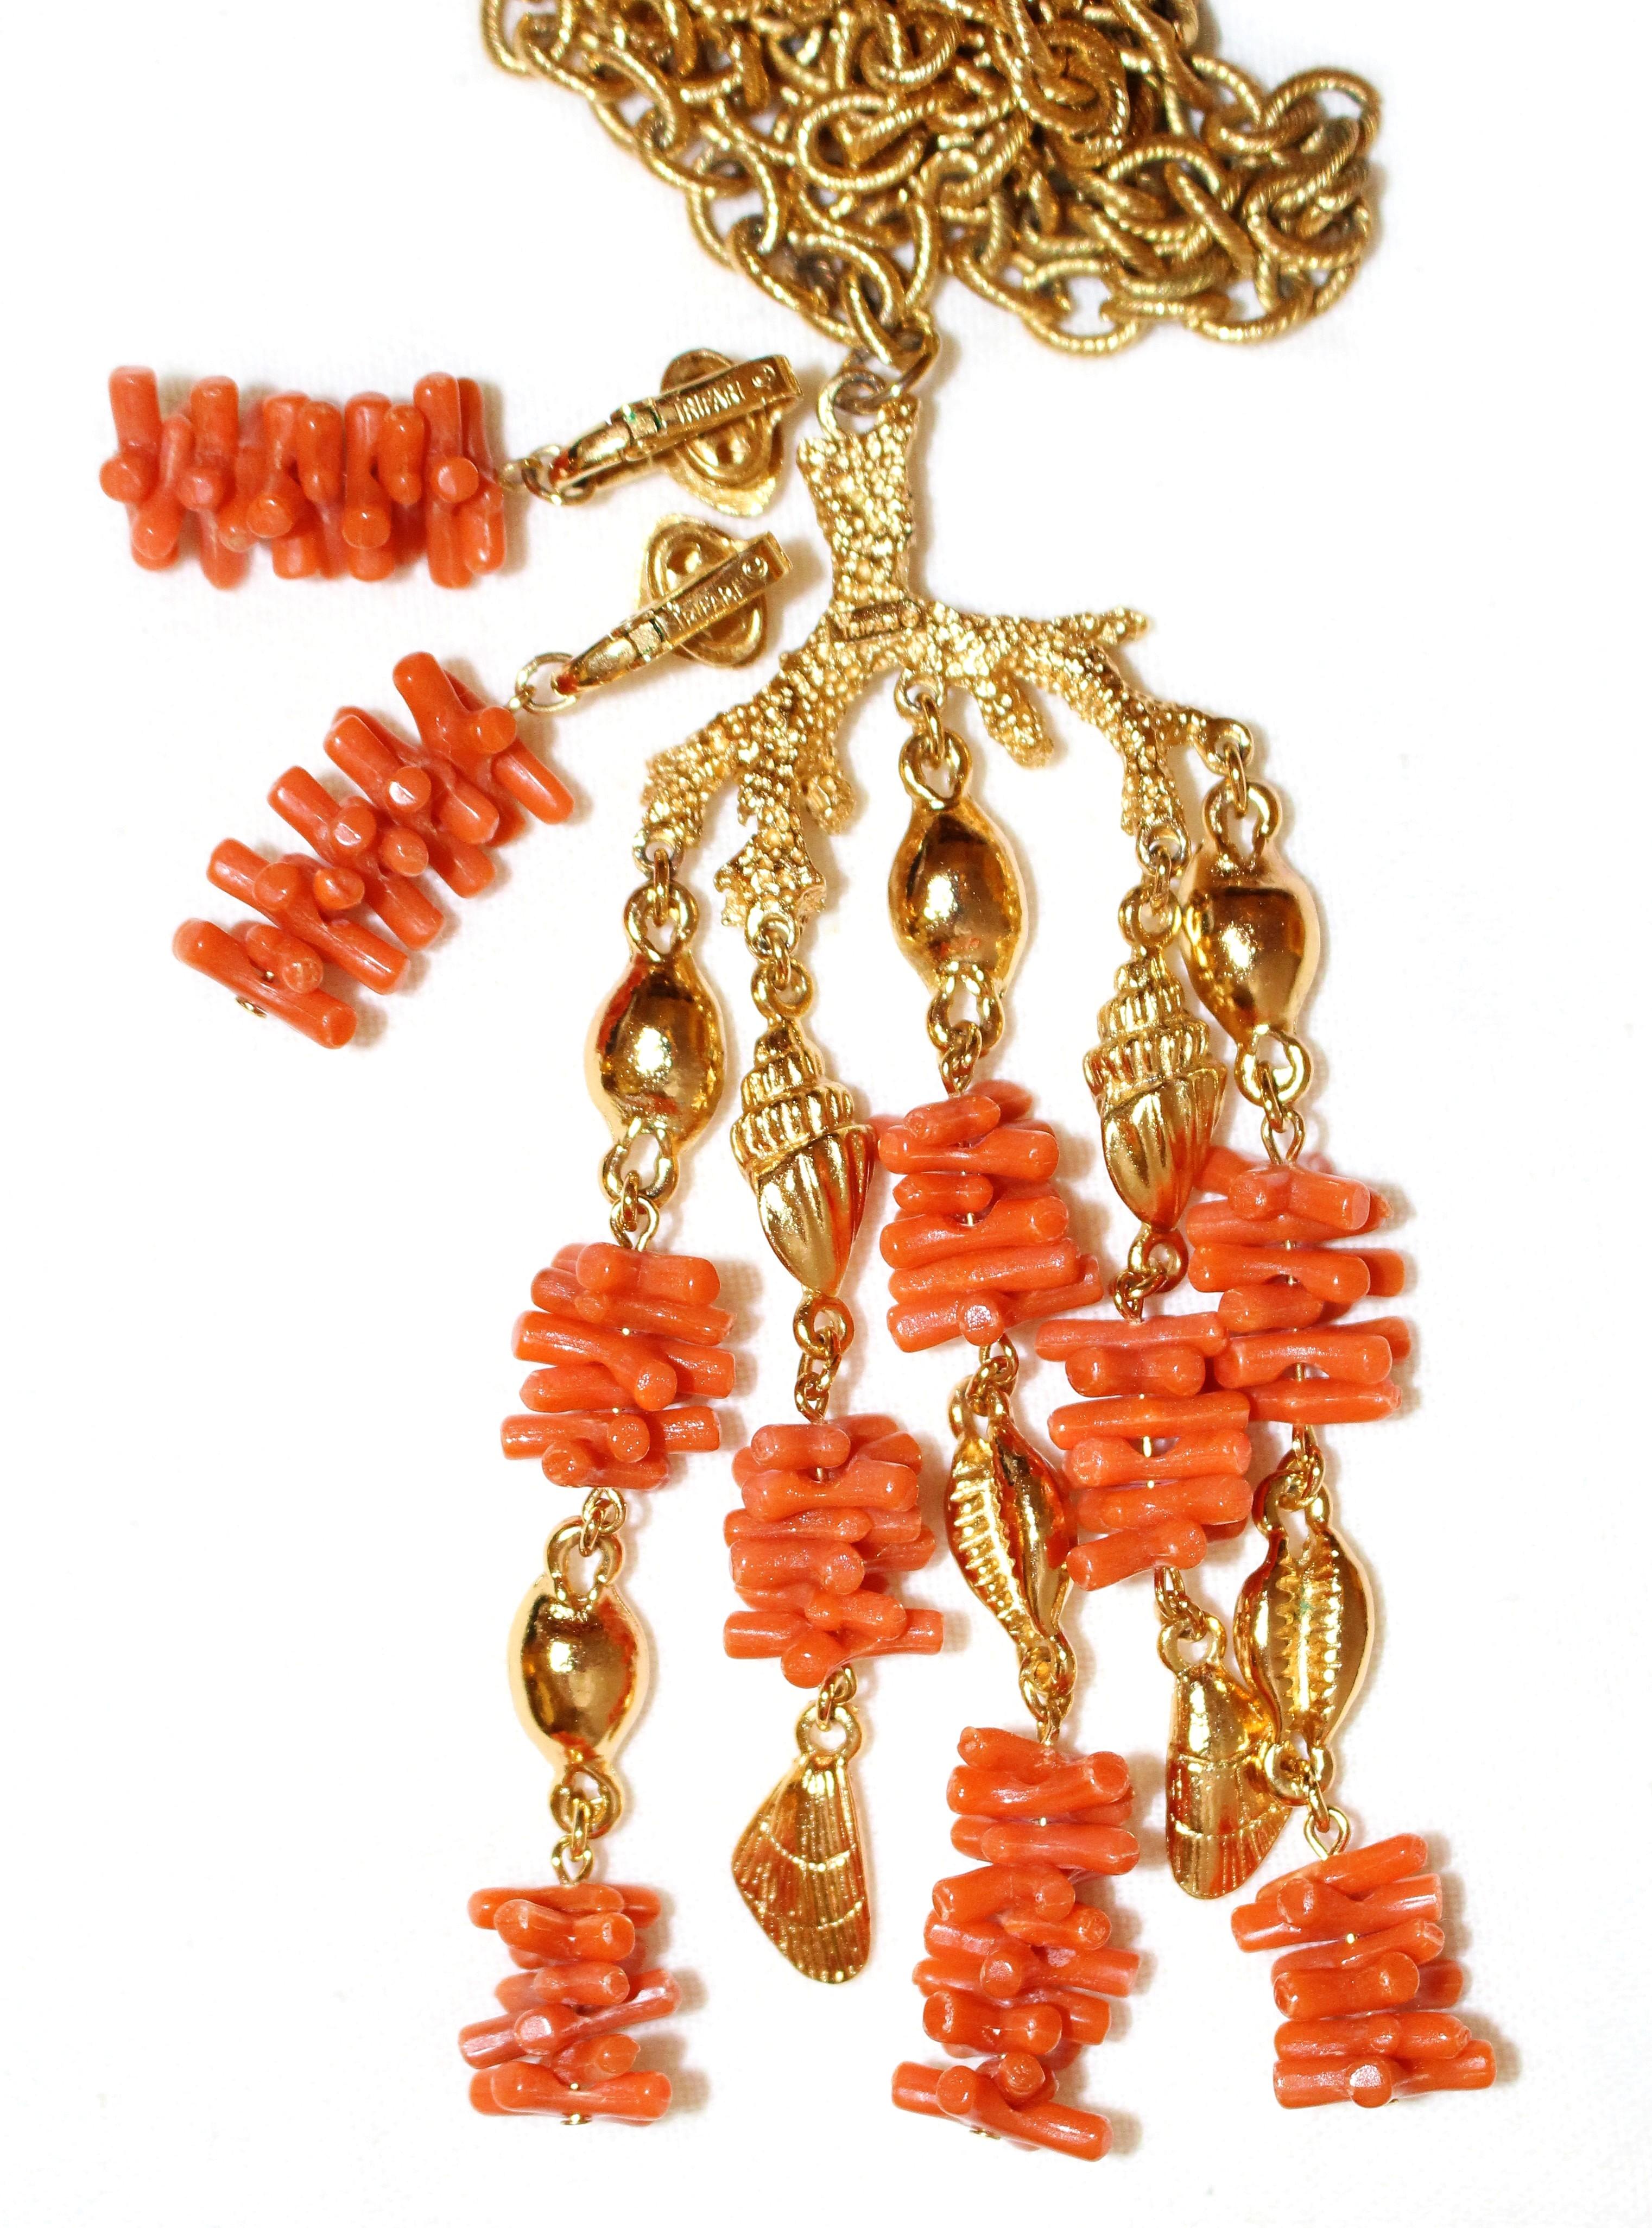 Circa 1960s Trifari Faux-Coral Necklace and Earrings Set Damen im Angebot